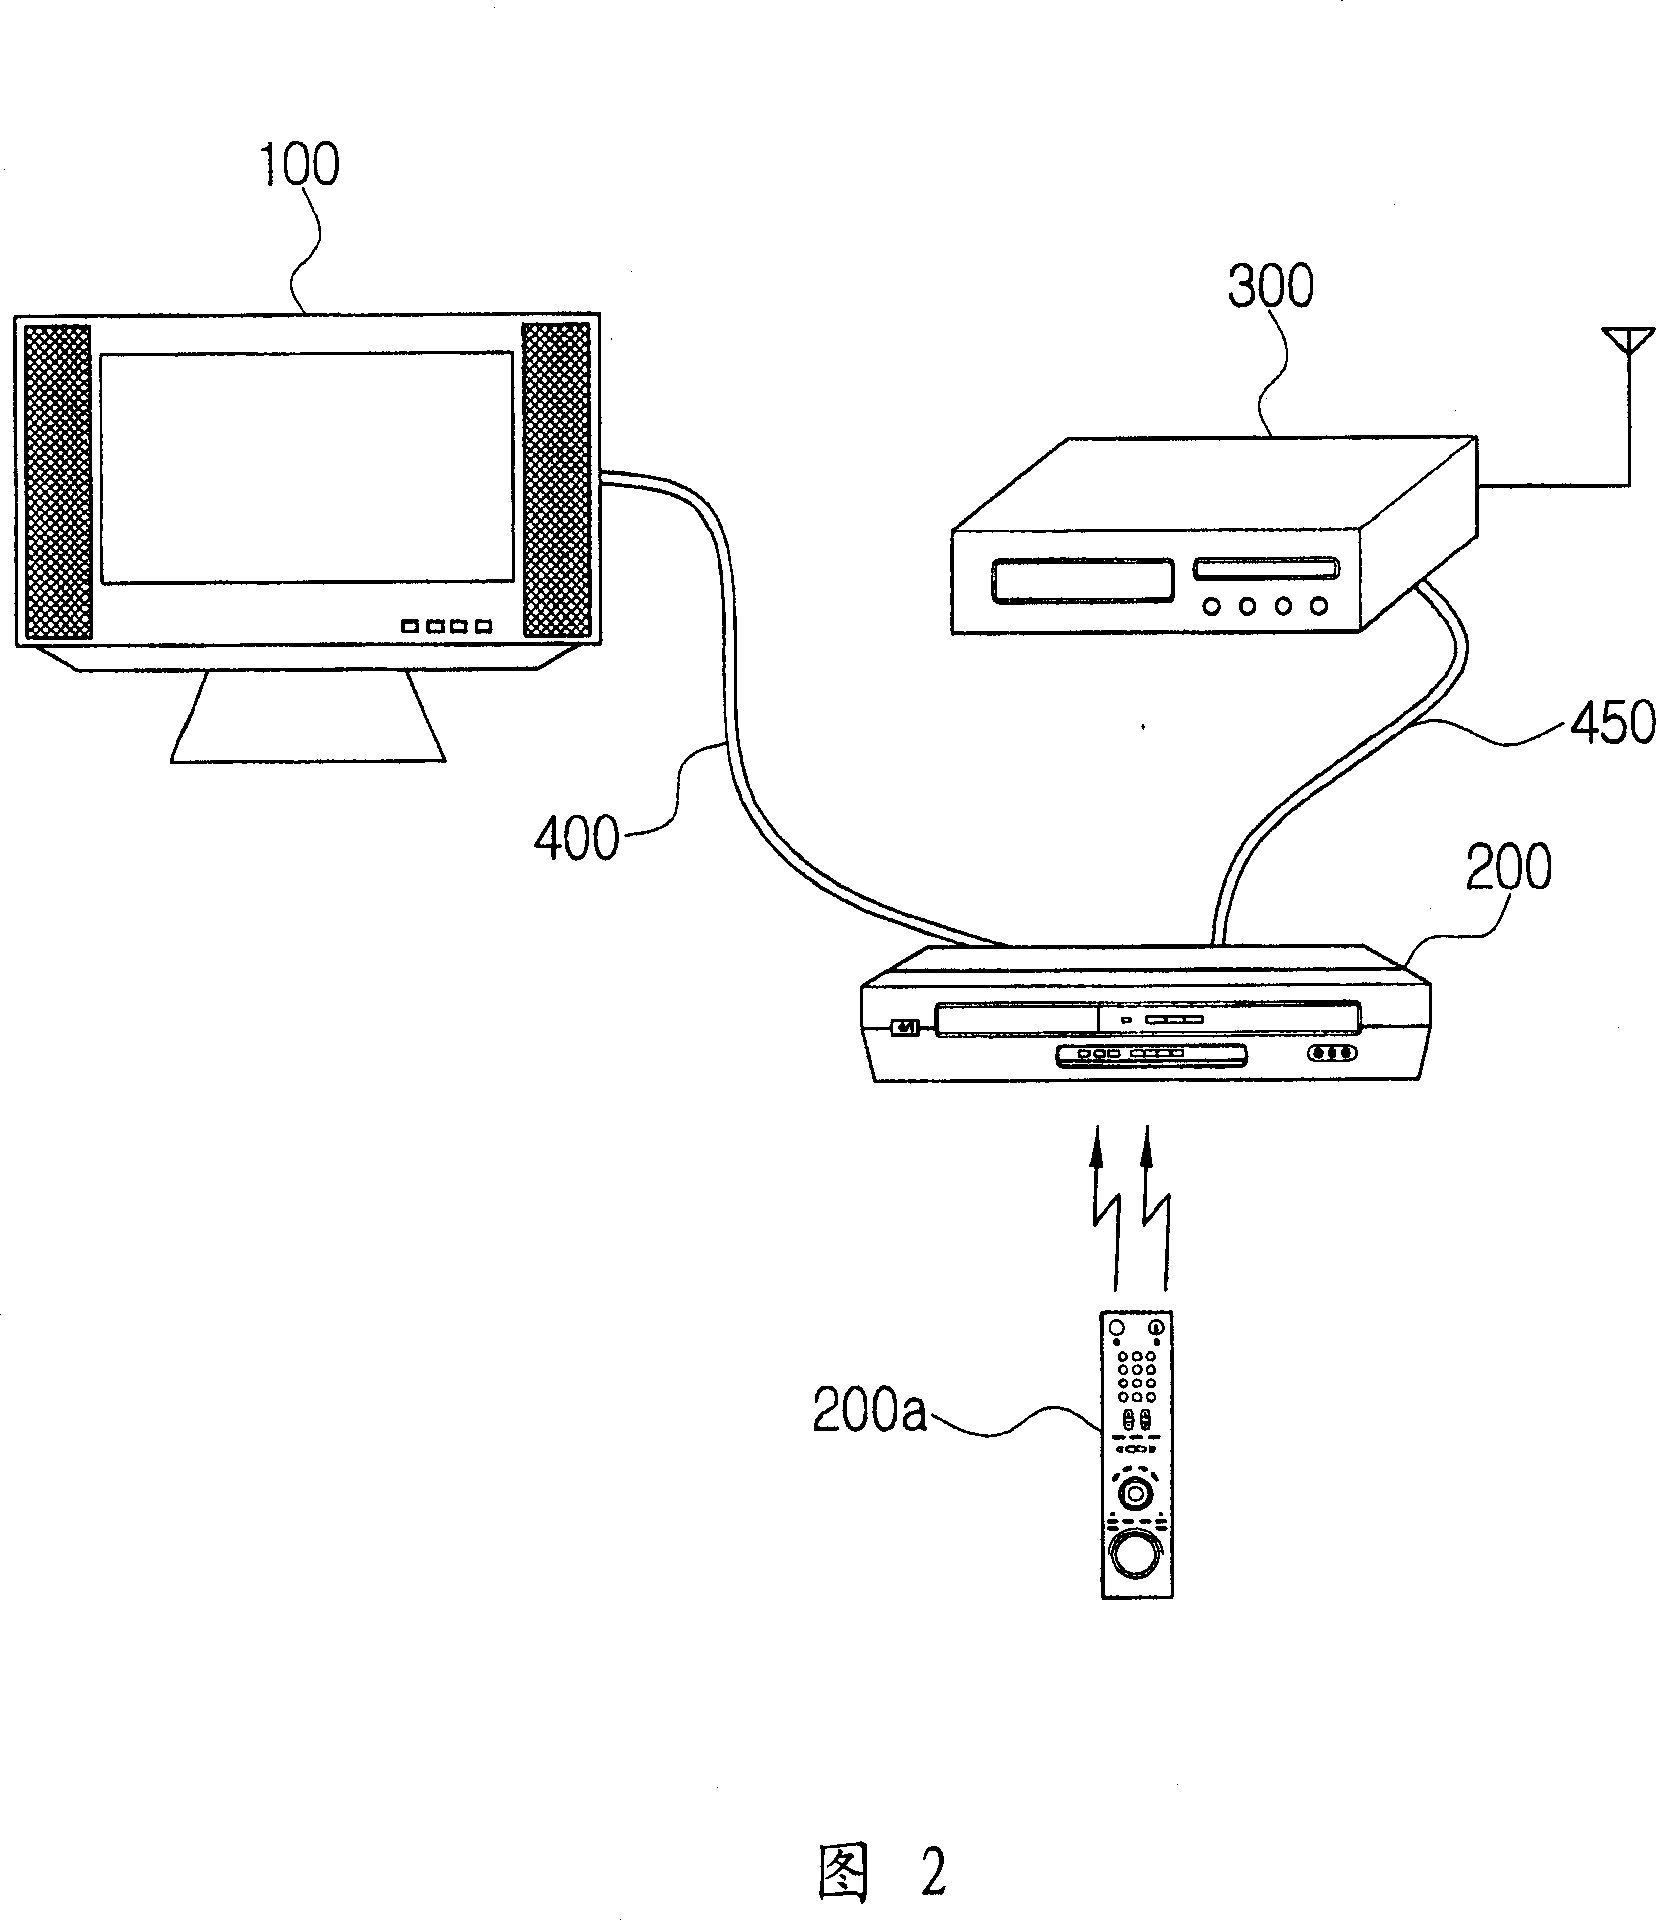 Combination system for selective switching A/V signal provided from A/V signal source and its control method